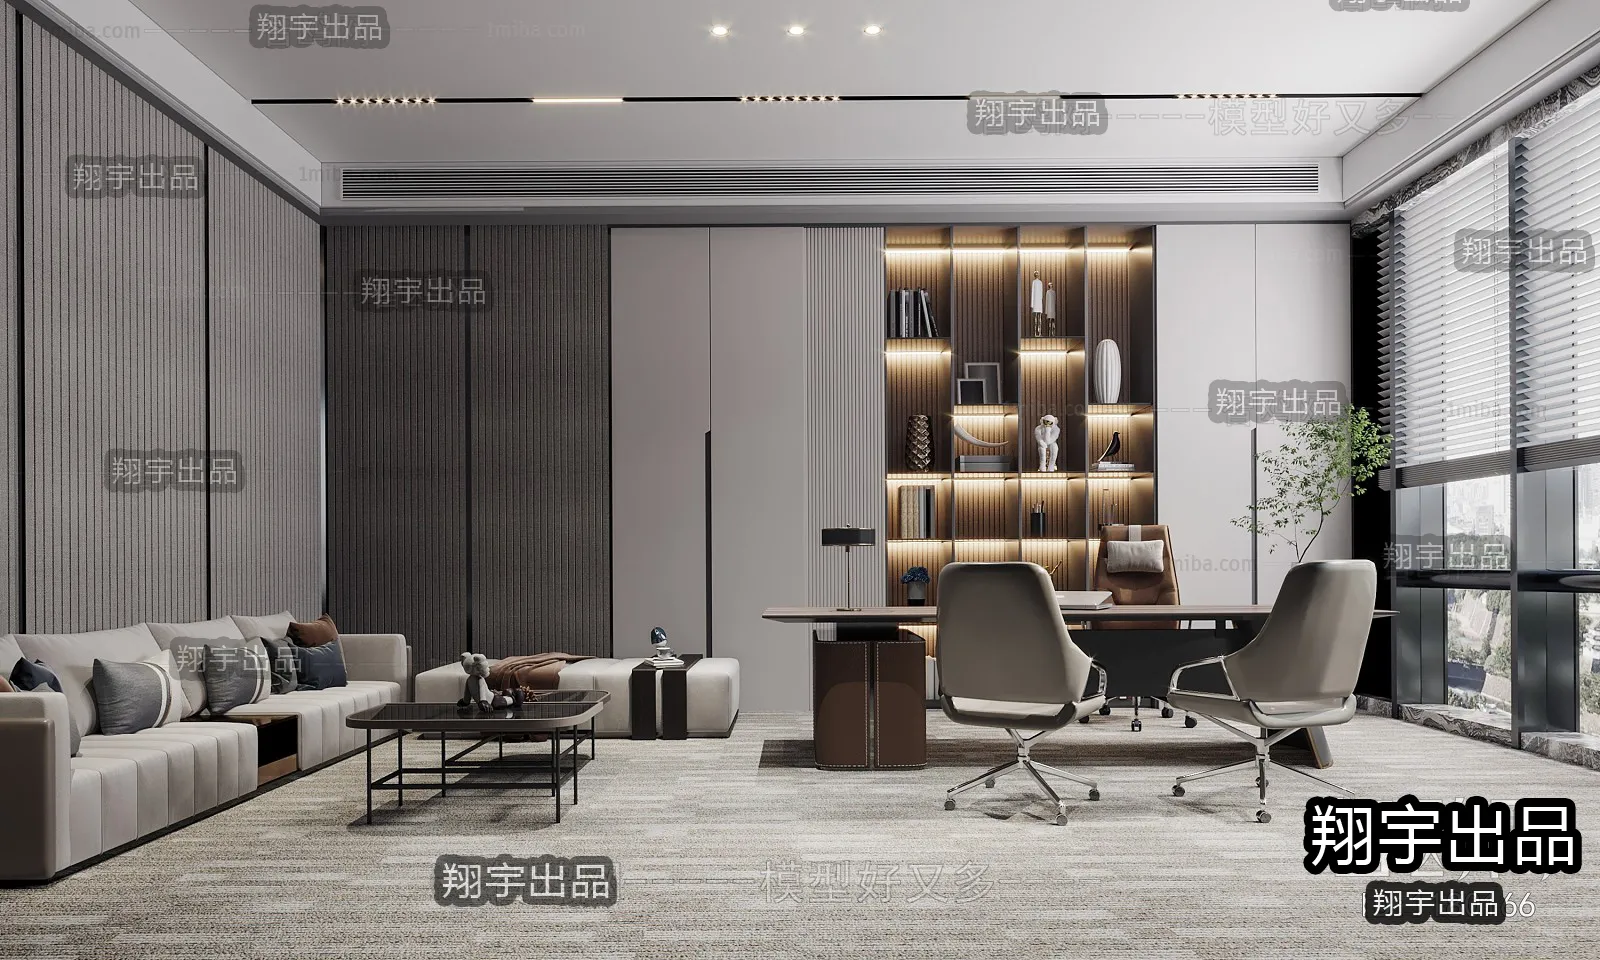 3D OFFICE INTERIOR (VRAY) – MANAGER ROOM 3D SCENES – 111